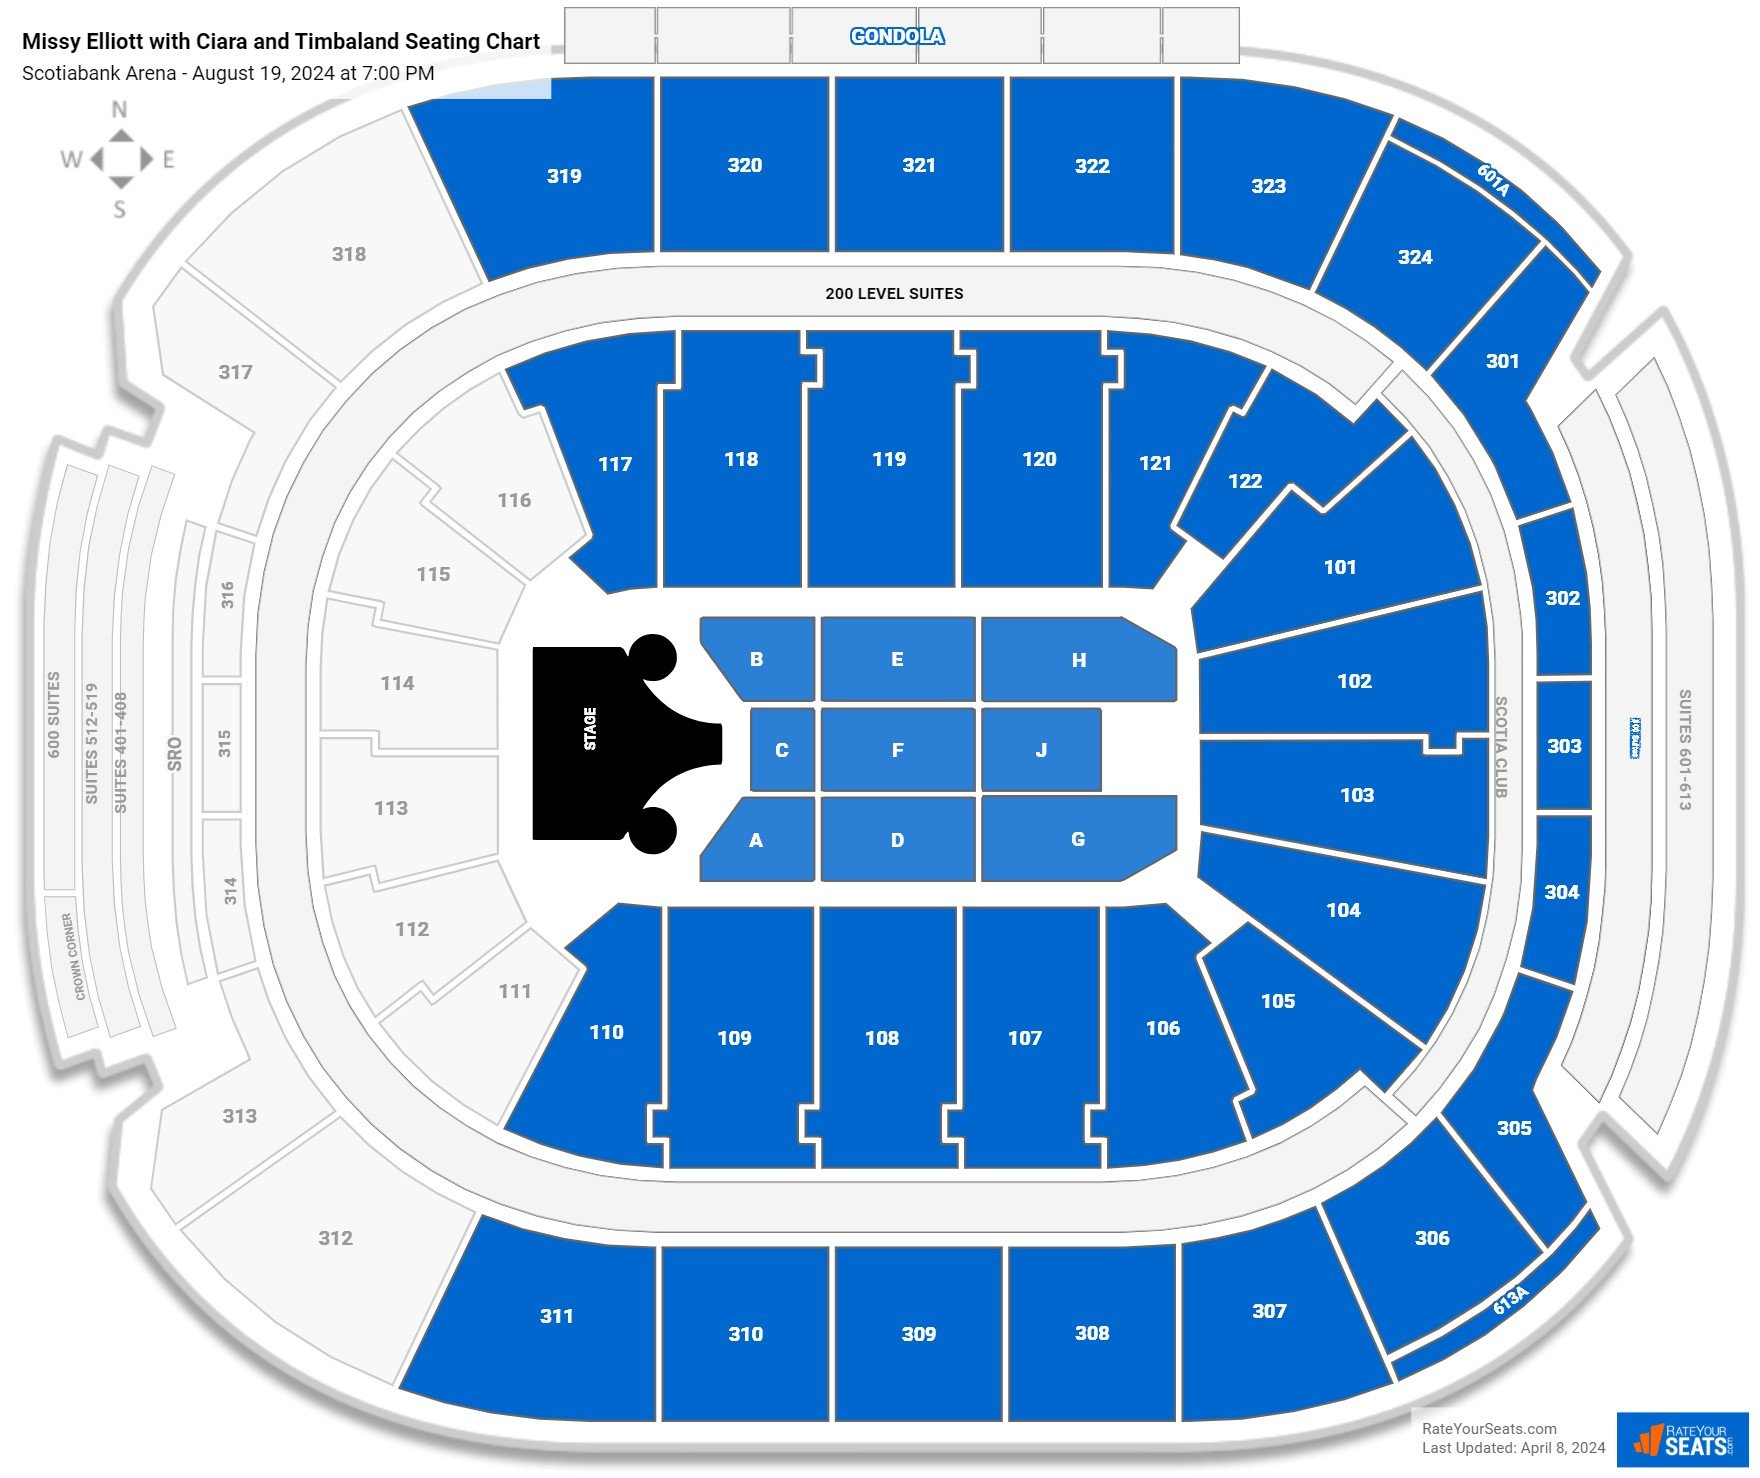 Missy Elliott with Ciara and Timbaland seating chart Scotiabank Arena